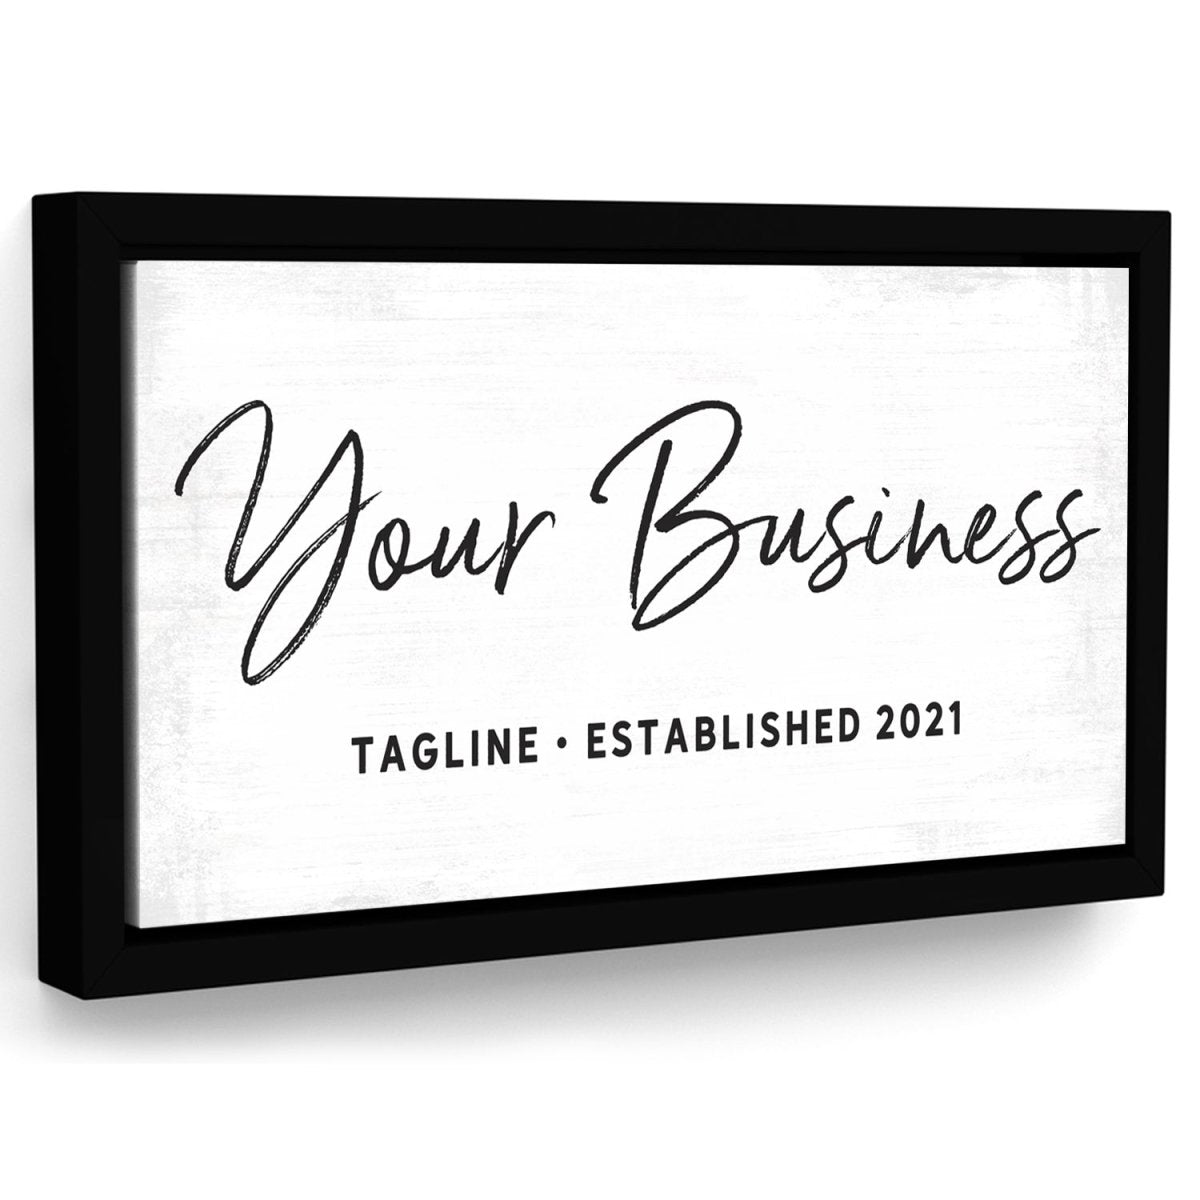 Custom Business Sign With Tagline and Date - Pretty Perfect Studio